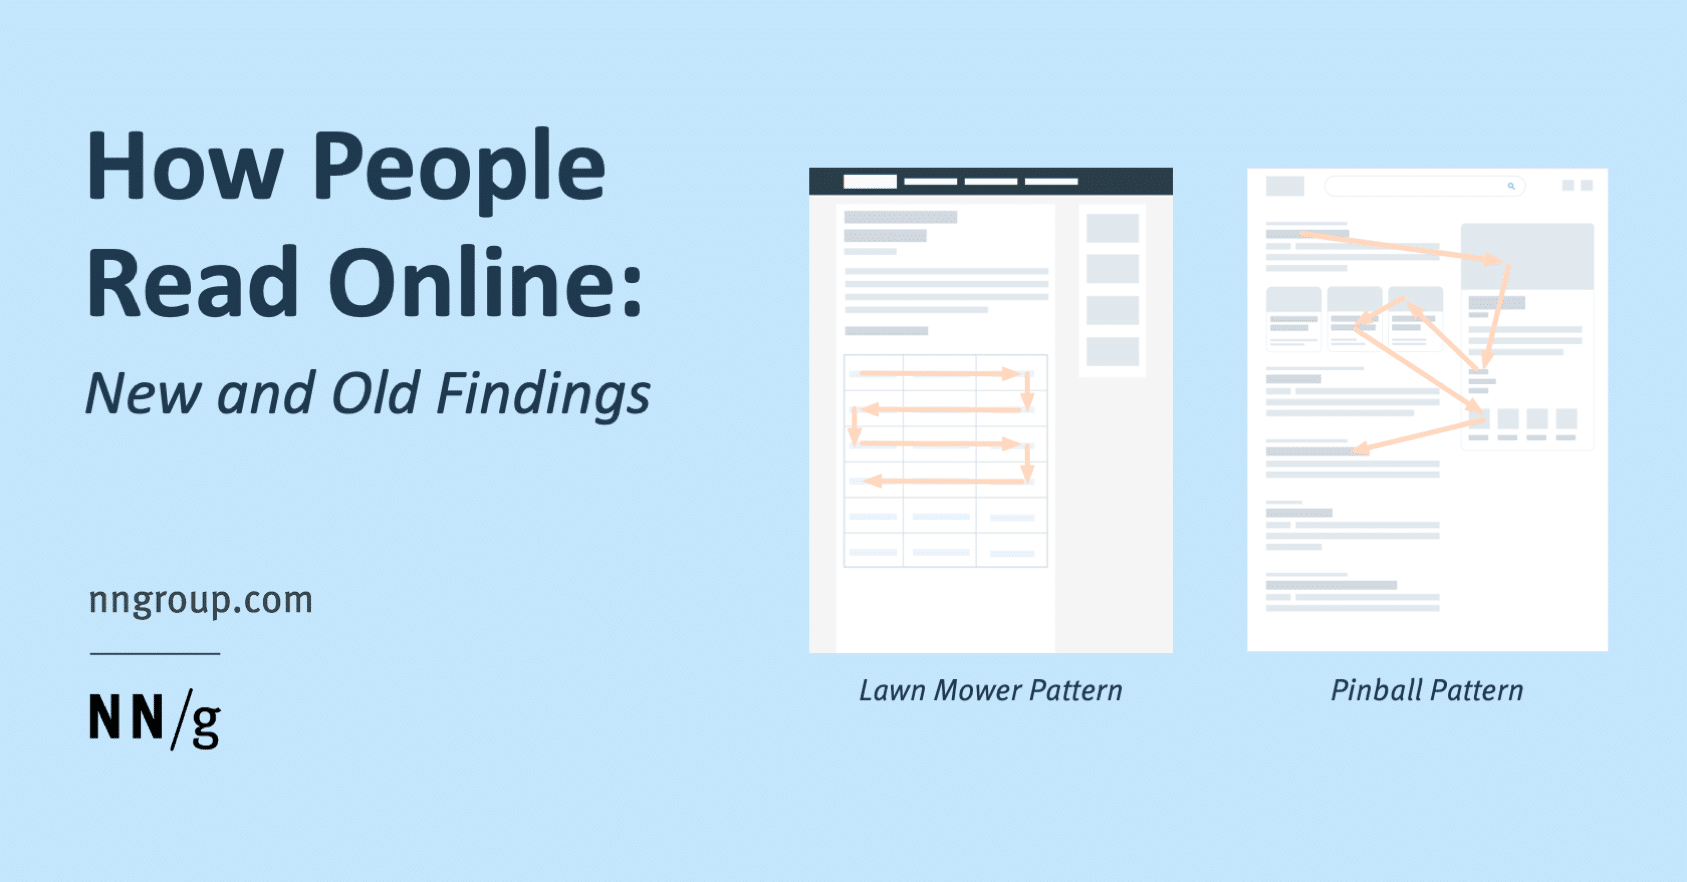 How People Read Online: New and Old Findings